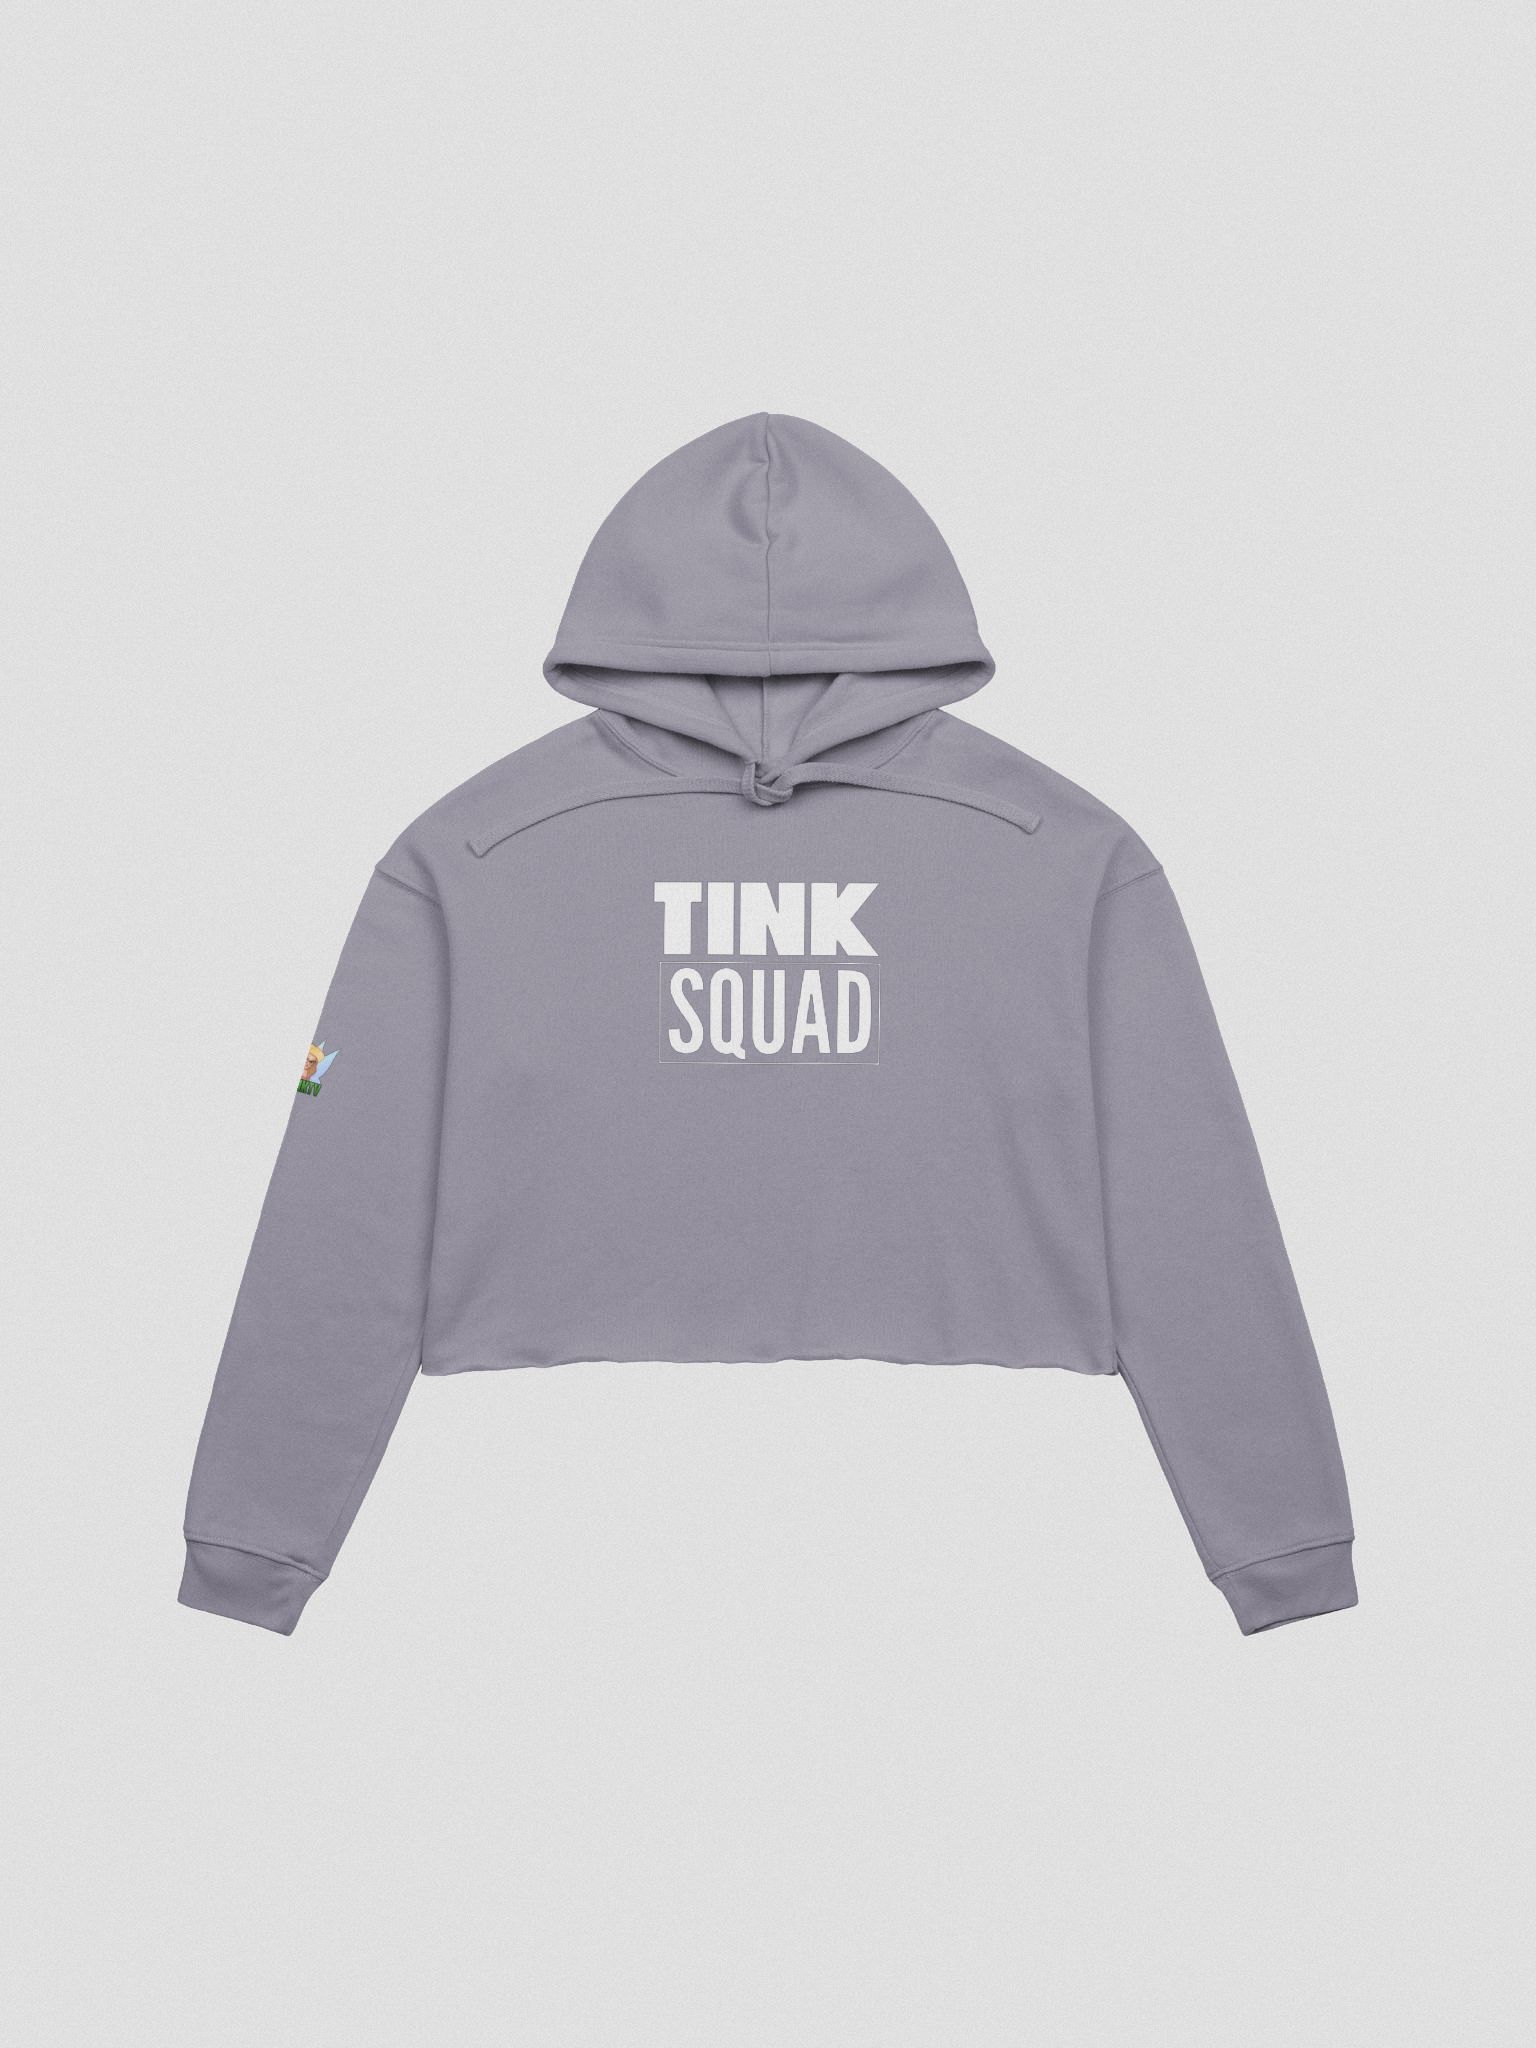 TINK SQUAD Women's Cropped Hoodie | tinktv